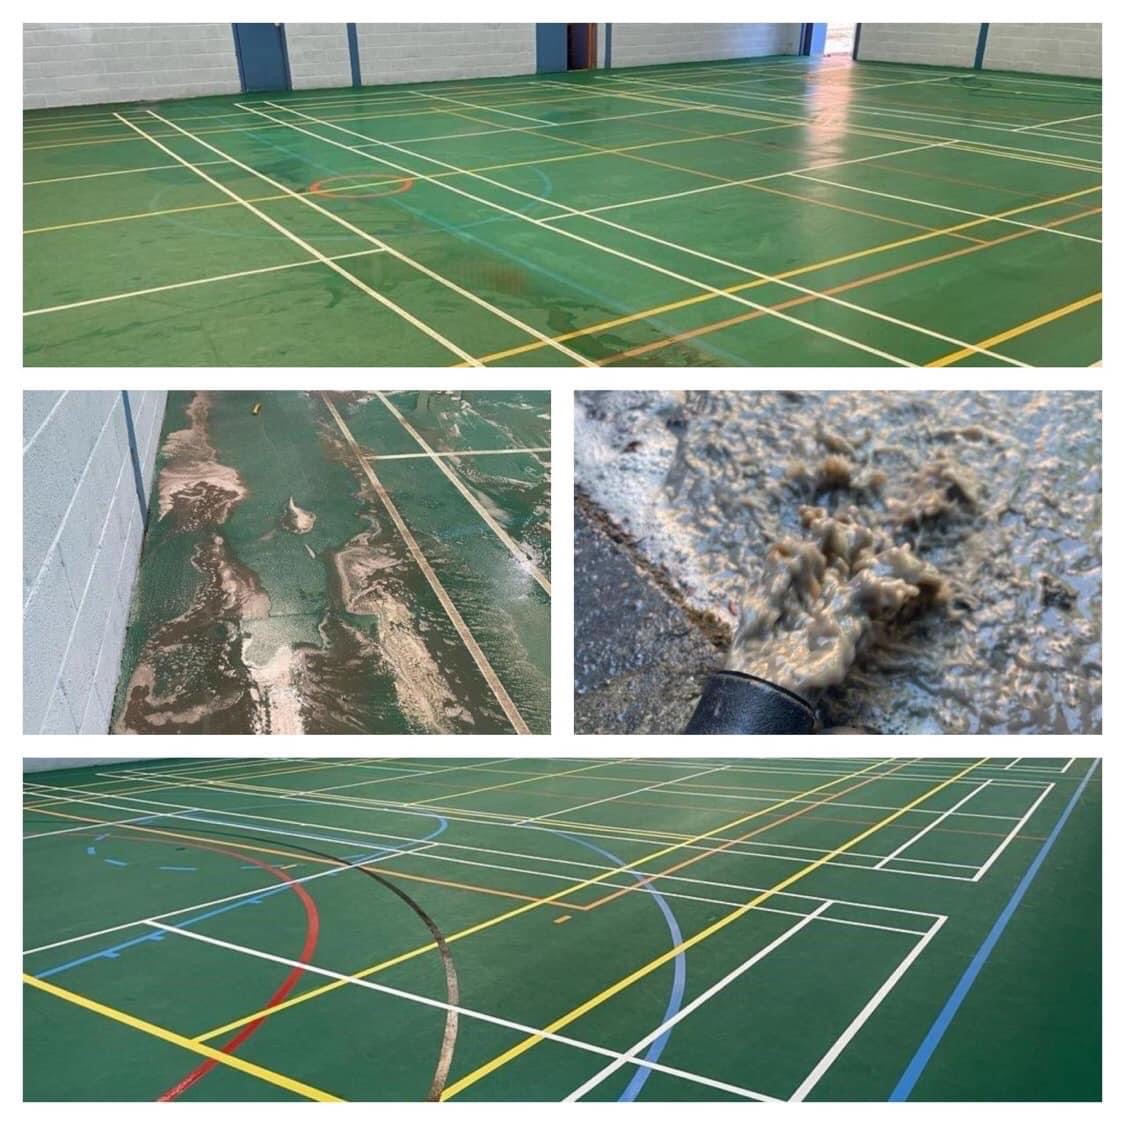 Deep cleaning their SSUK Uni-Turf floor, followed by new line markings, helping to bring the floor back to life.